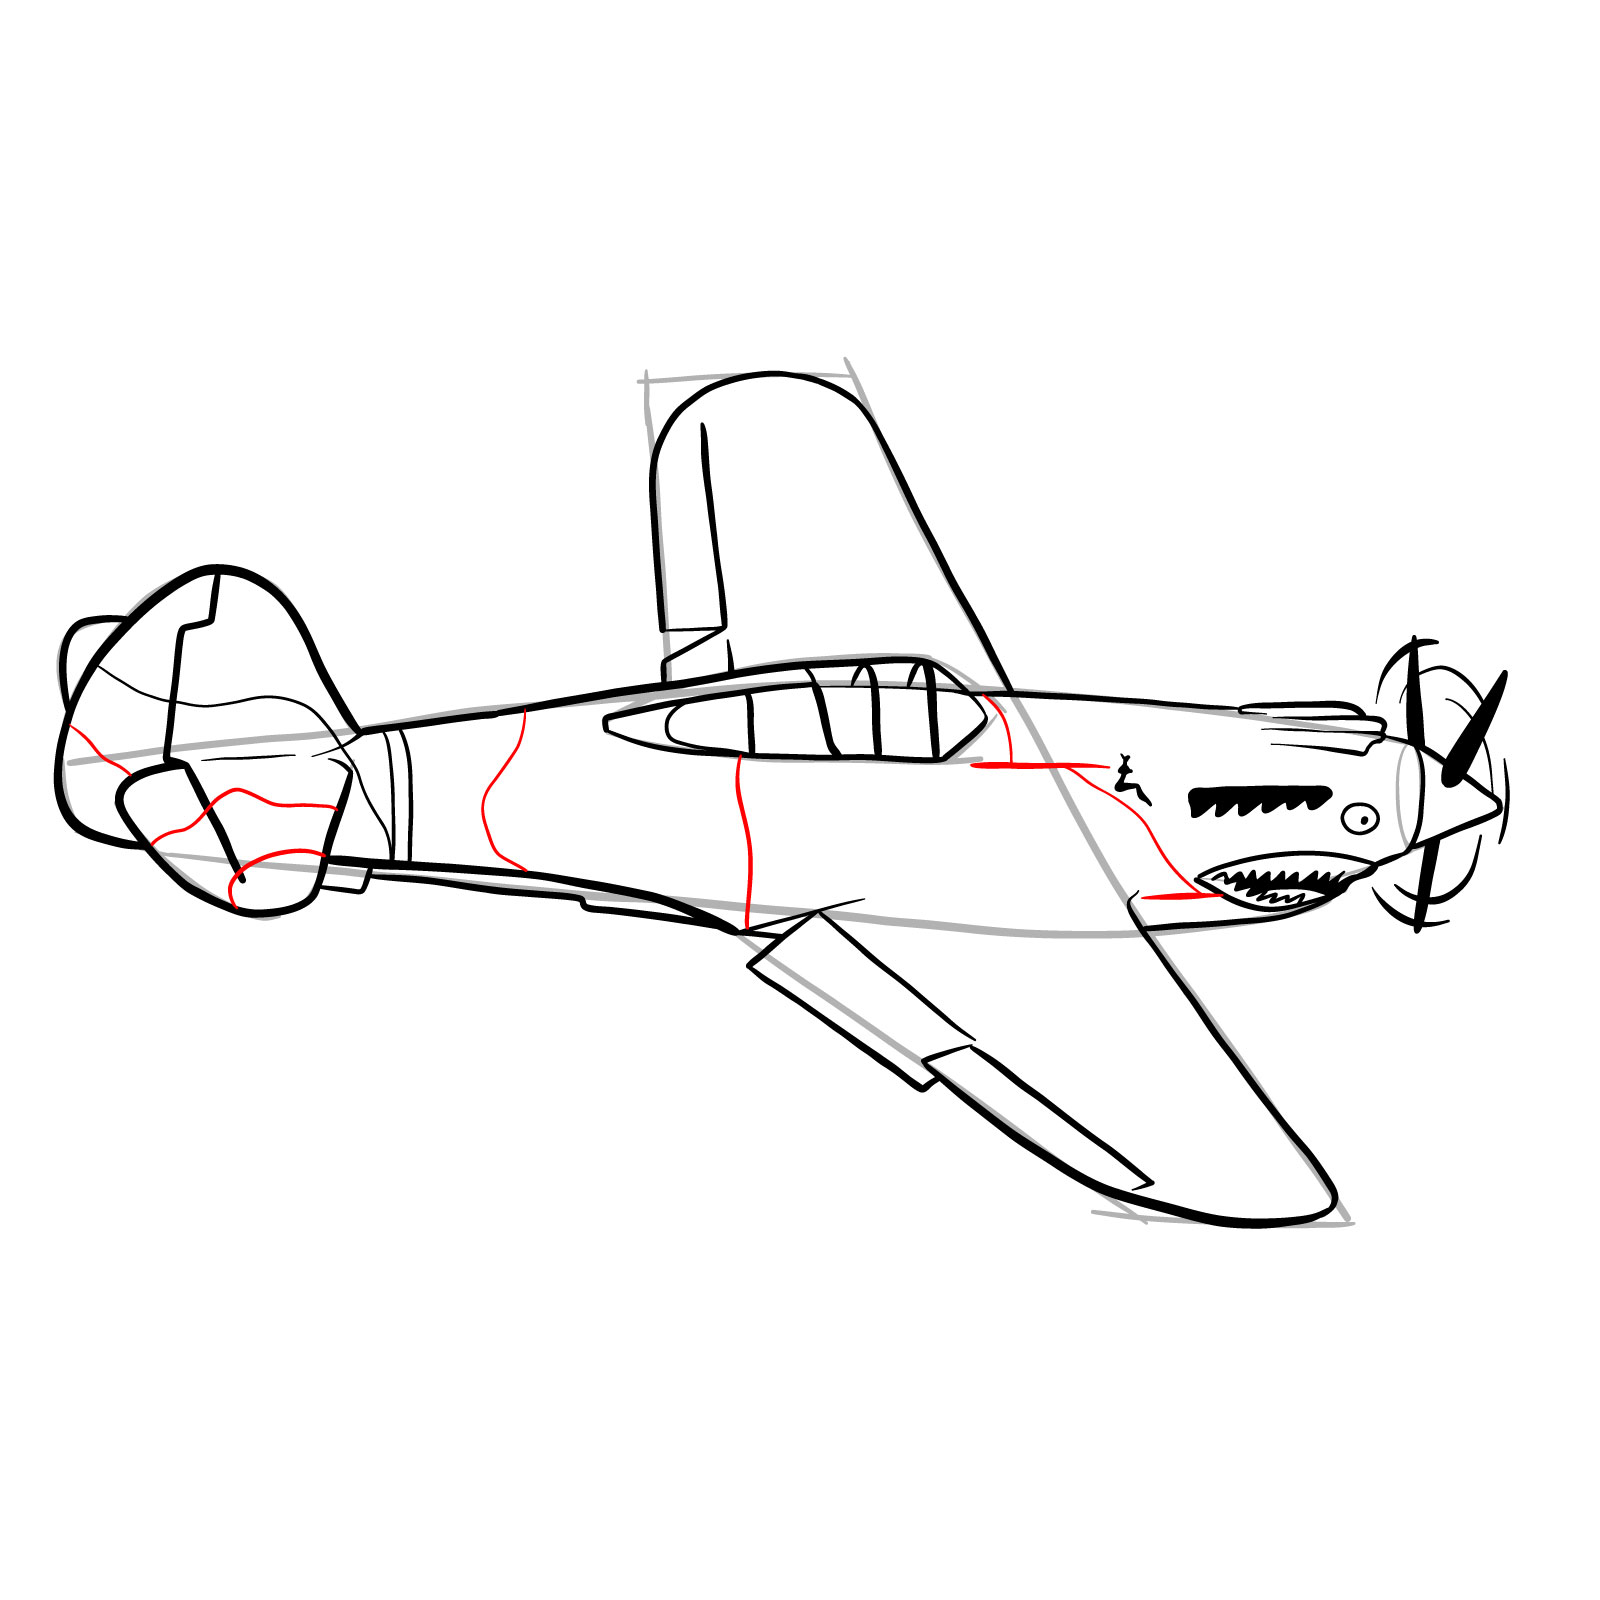 How to draw a P-40 Flying Tiger - step 28